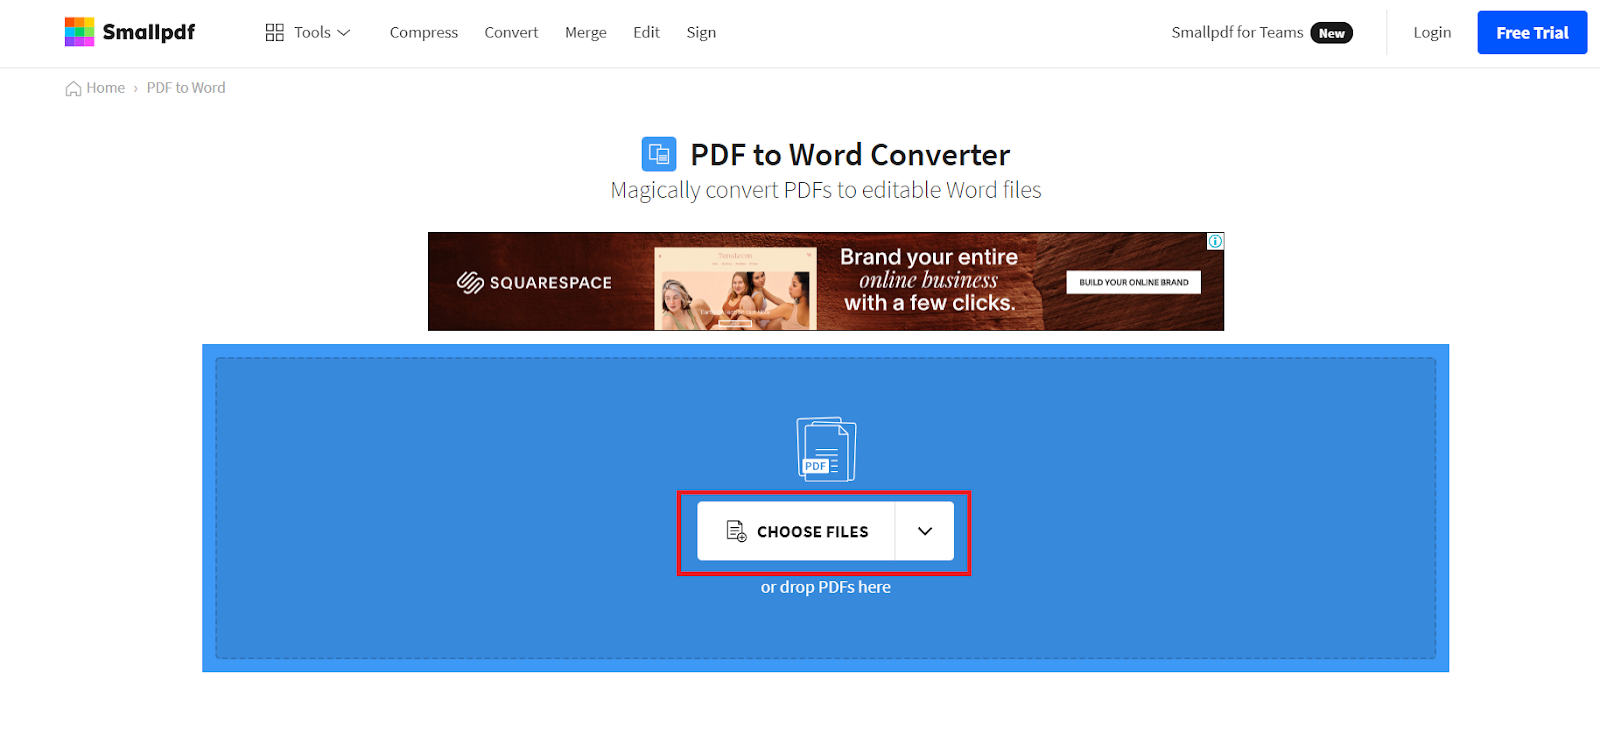 3 Ways On How To Make An Existing PDF Editable : Online and Offline